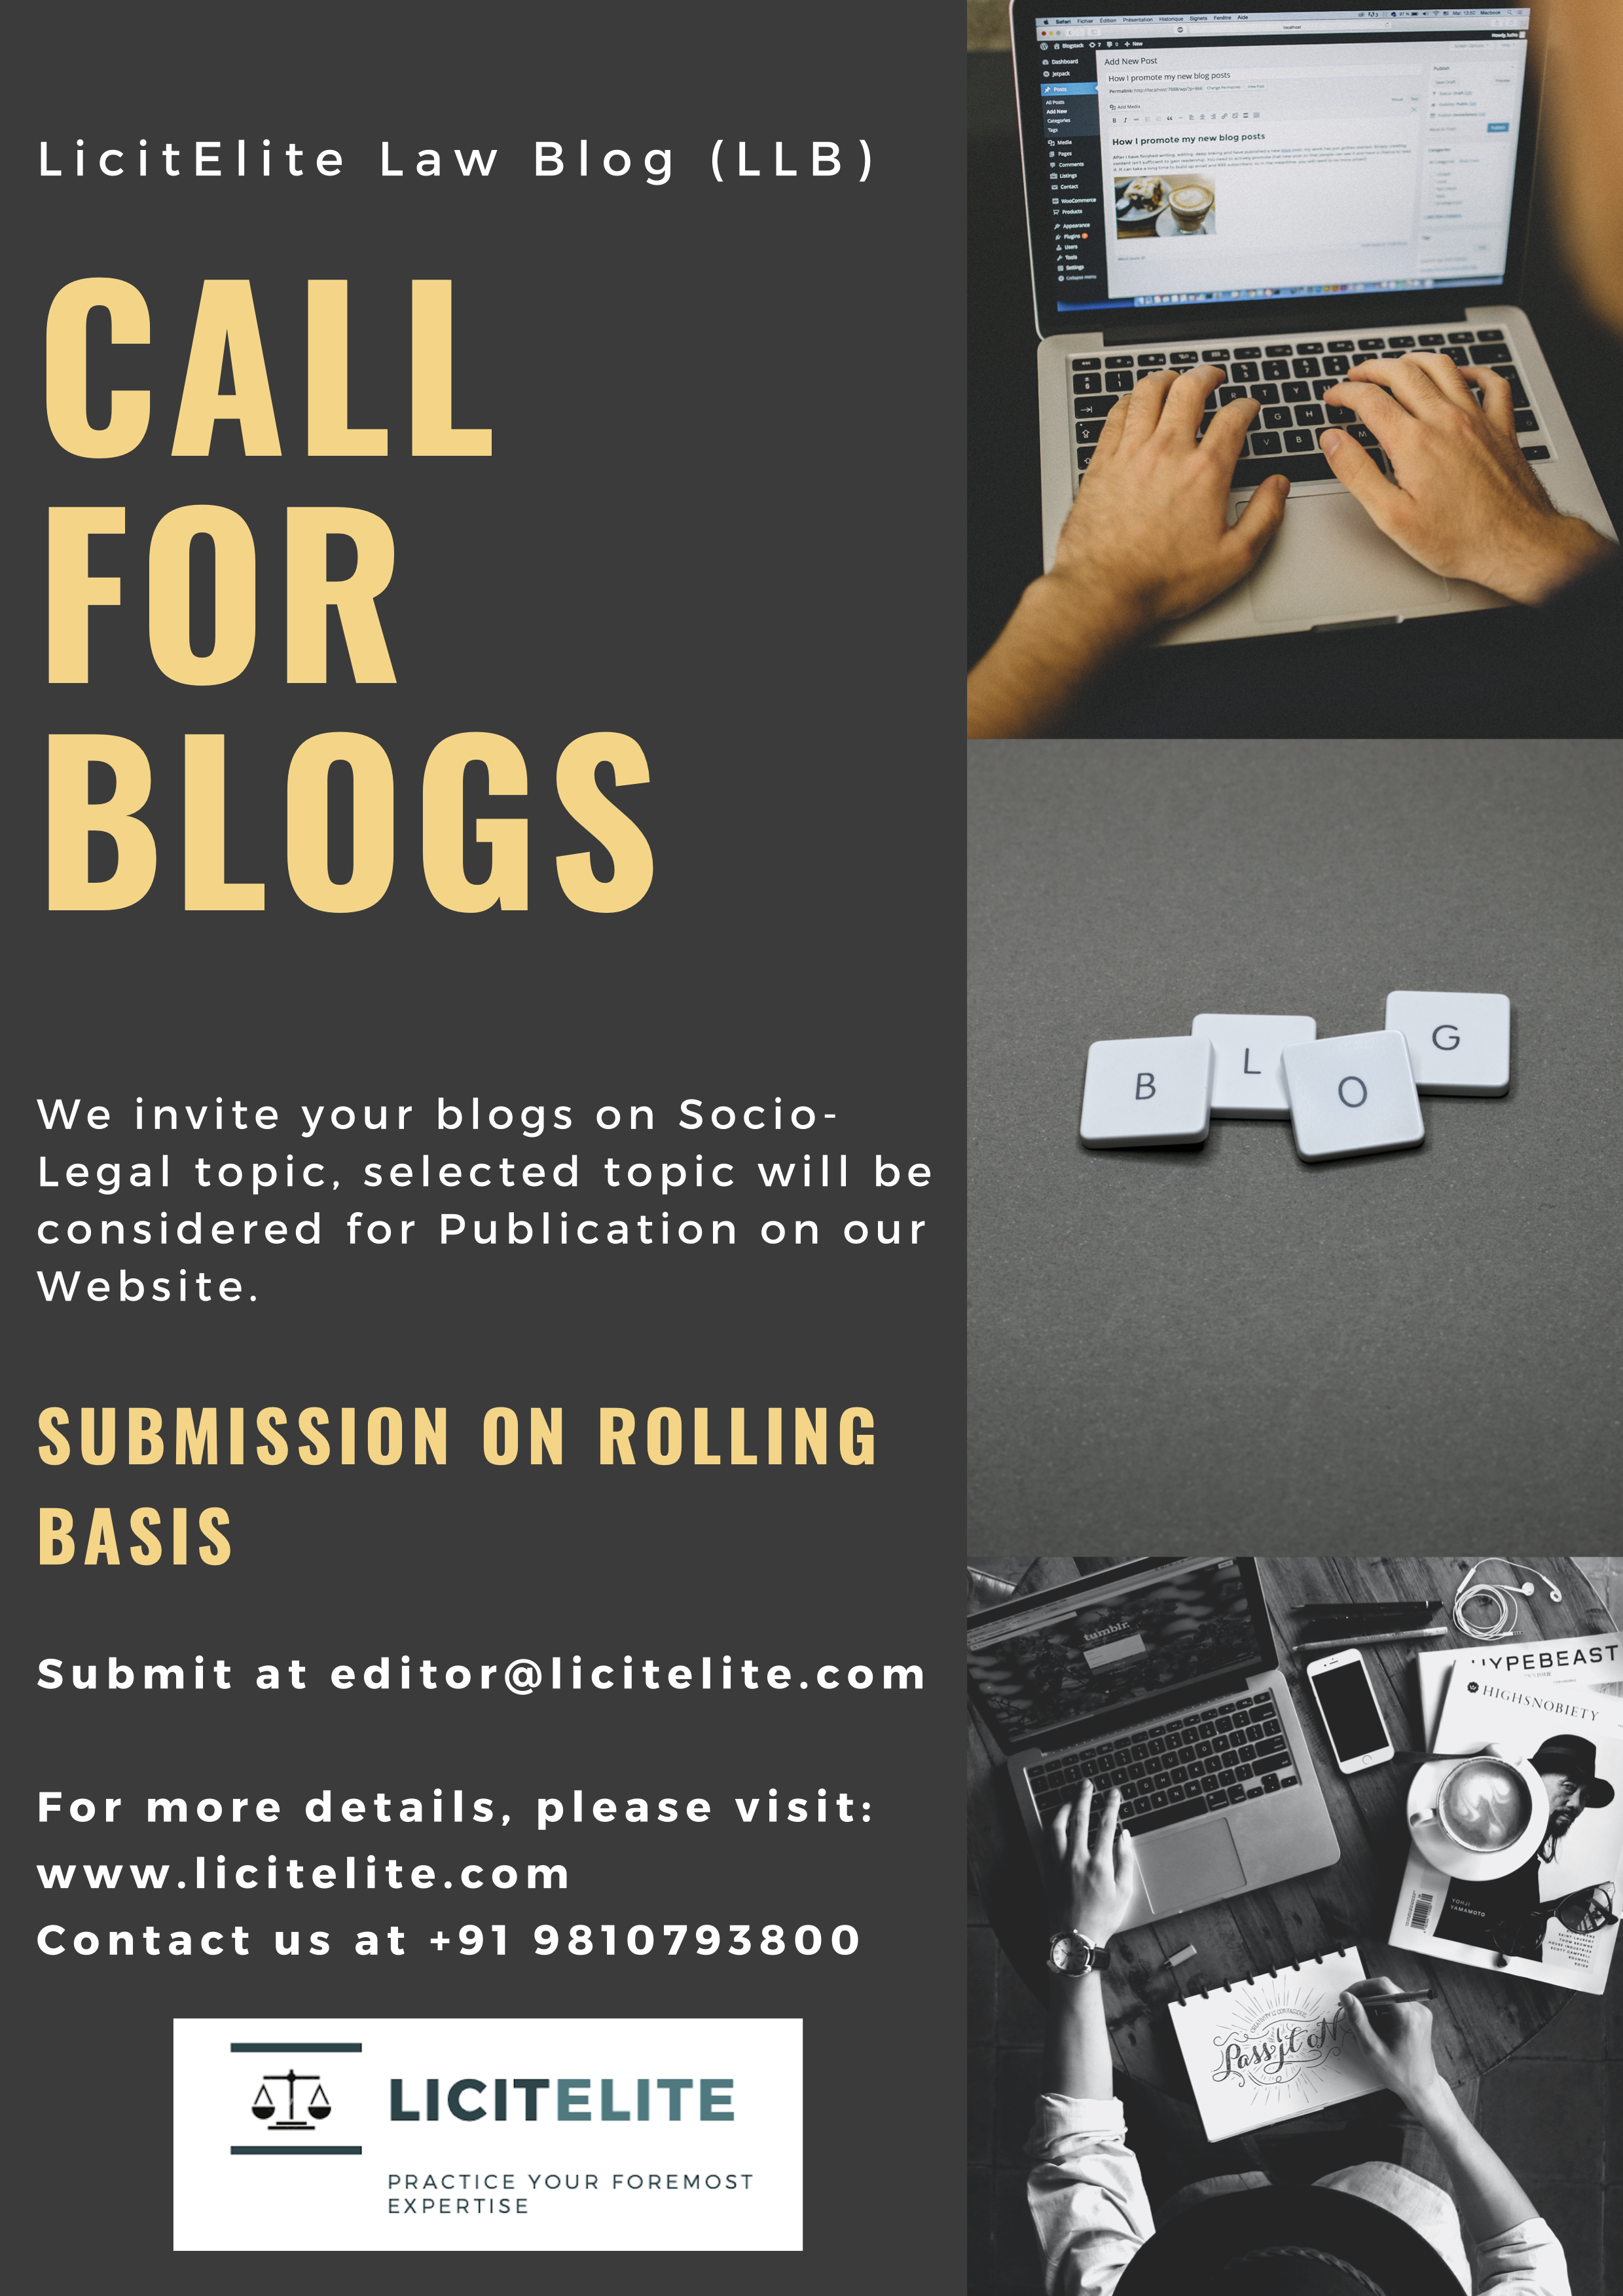 Call for Blogs